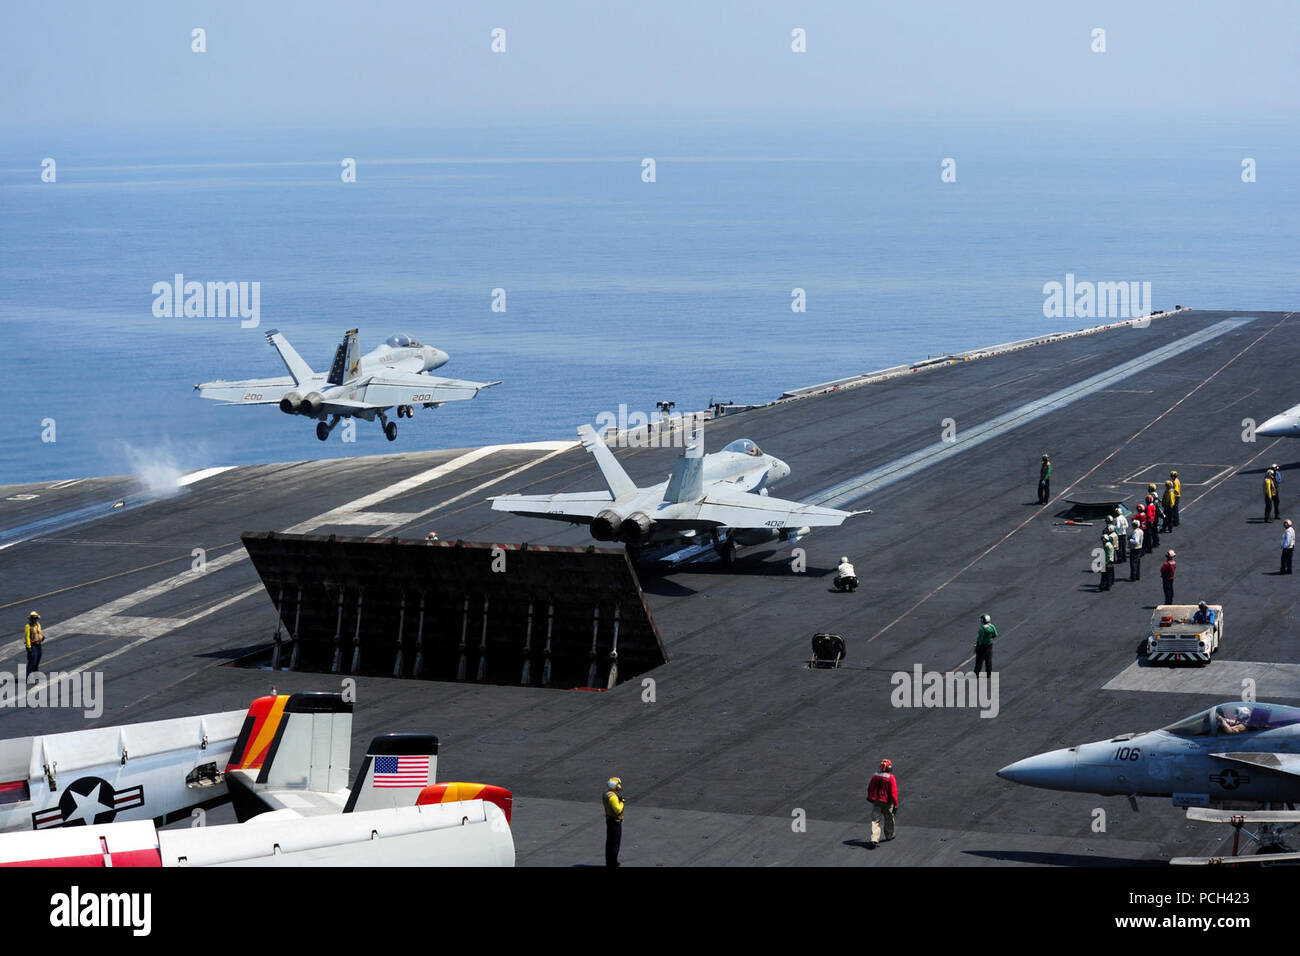 A U.S. Navy F/A-18E Super Hornet aircraft assigned to Strike Fighter Squadron (VFA) 213 takes off from the aircraft carrier USS George H.W. Bush (CVN 77) Sept. 2, 2014, in the Persian Gulf. The George H.W. Bush was supporting maritime security operations and theater security cooperation efforts in the U.S. 5th Fleet area of responsibility. Stock Photo